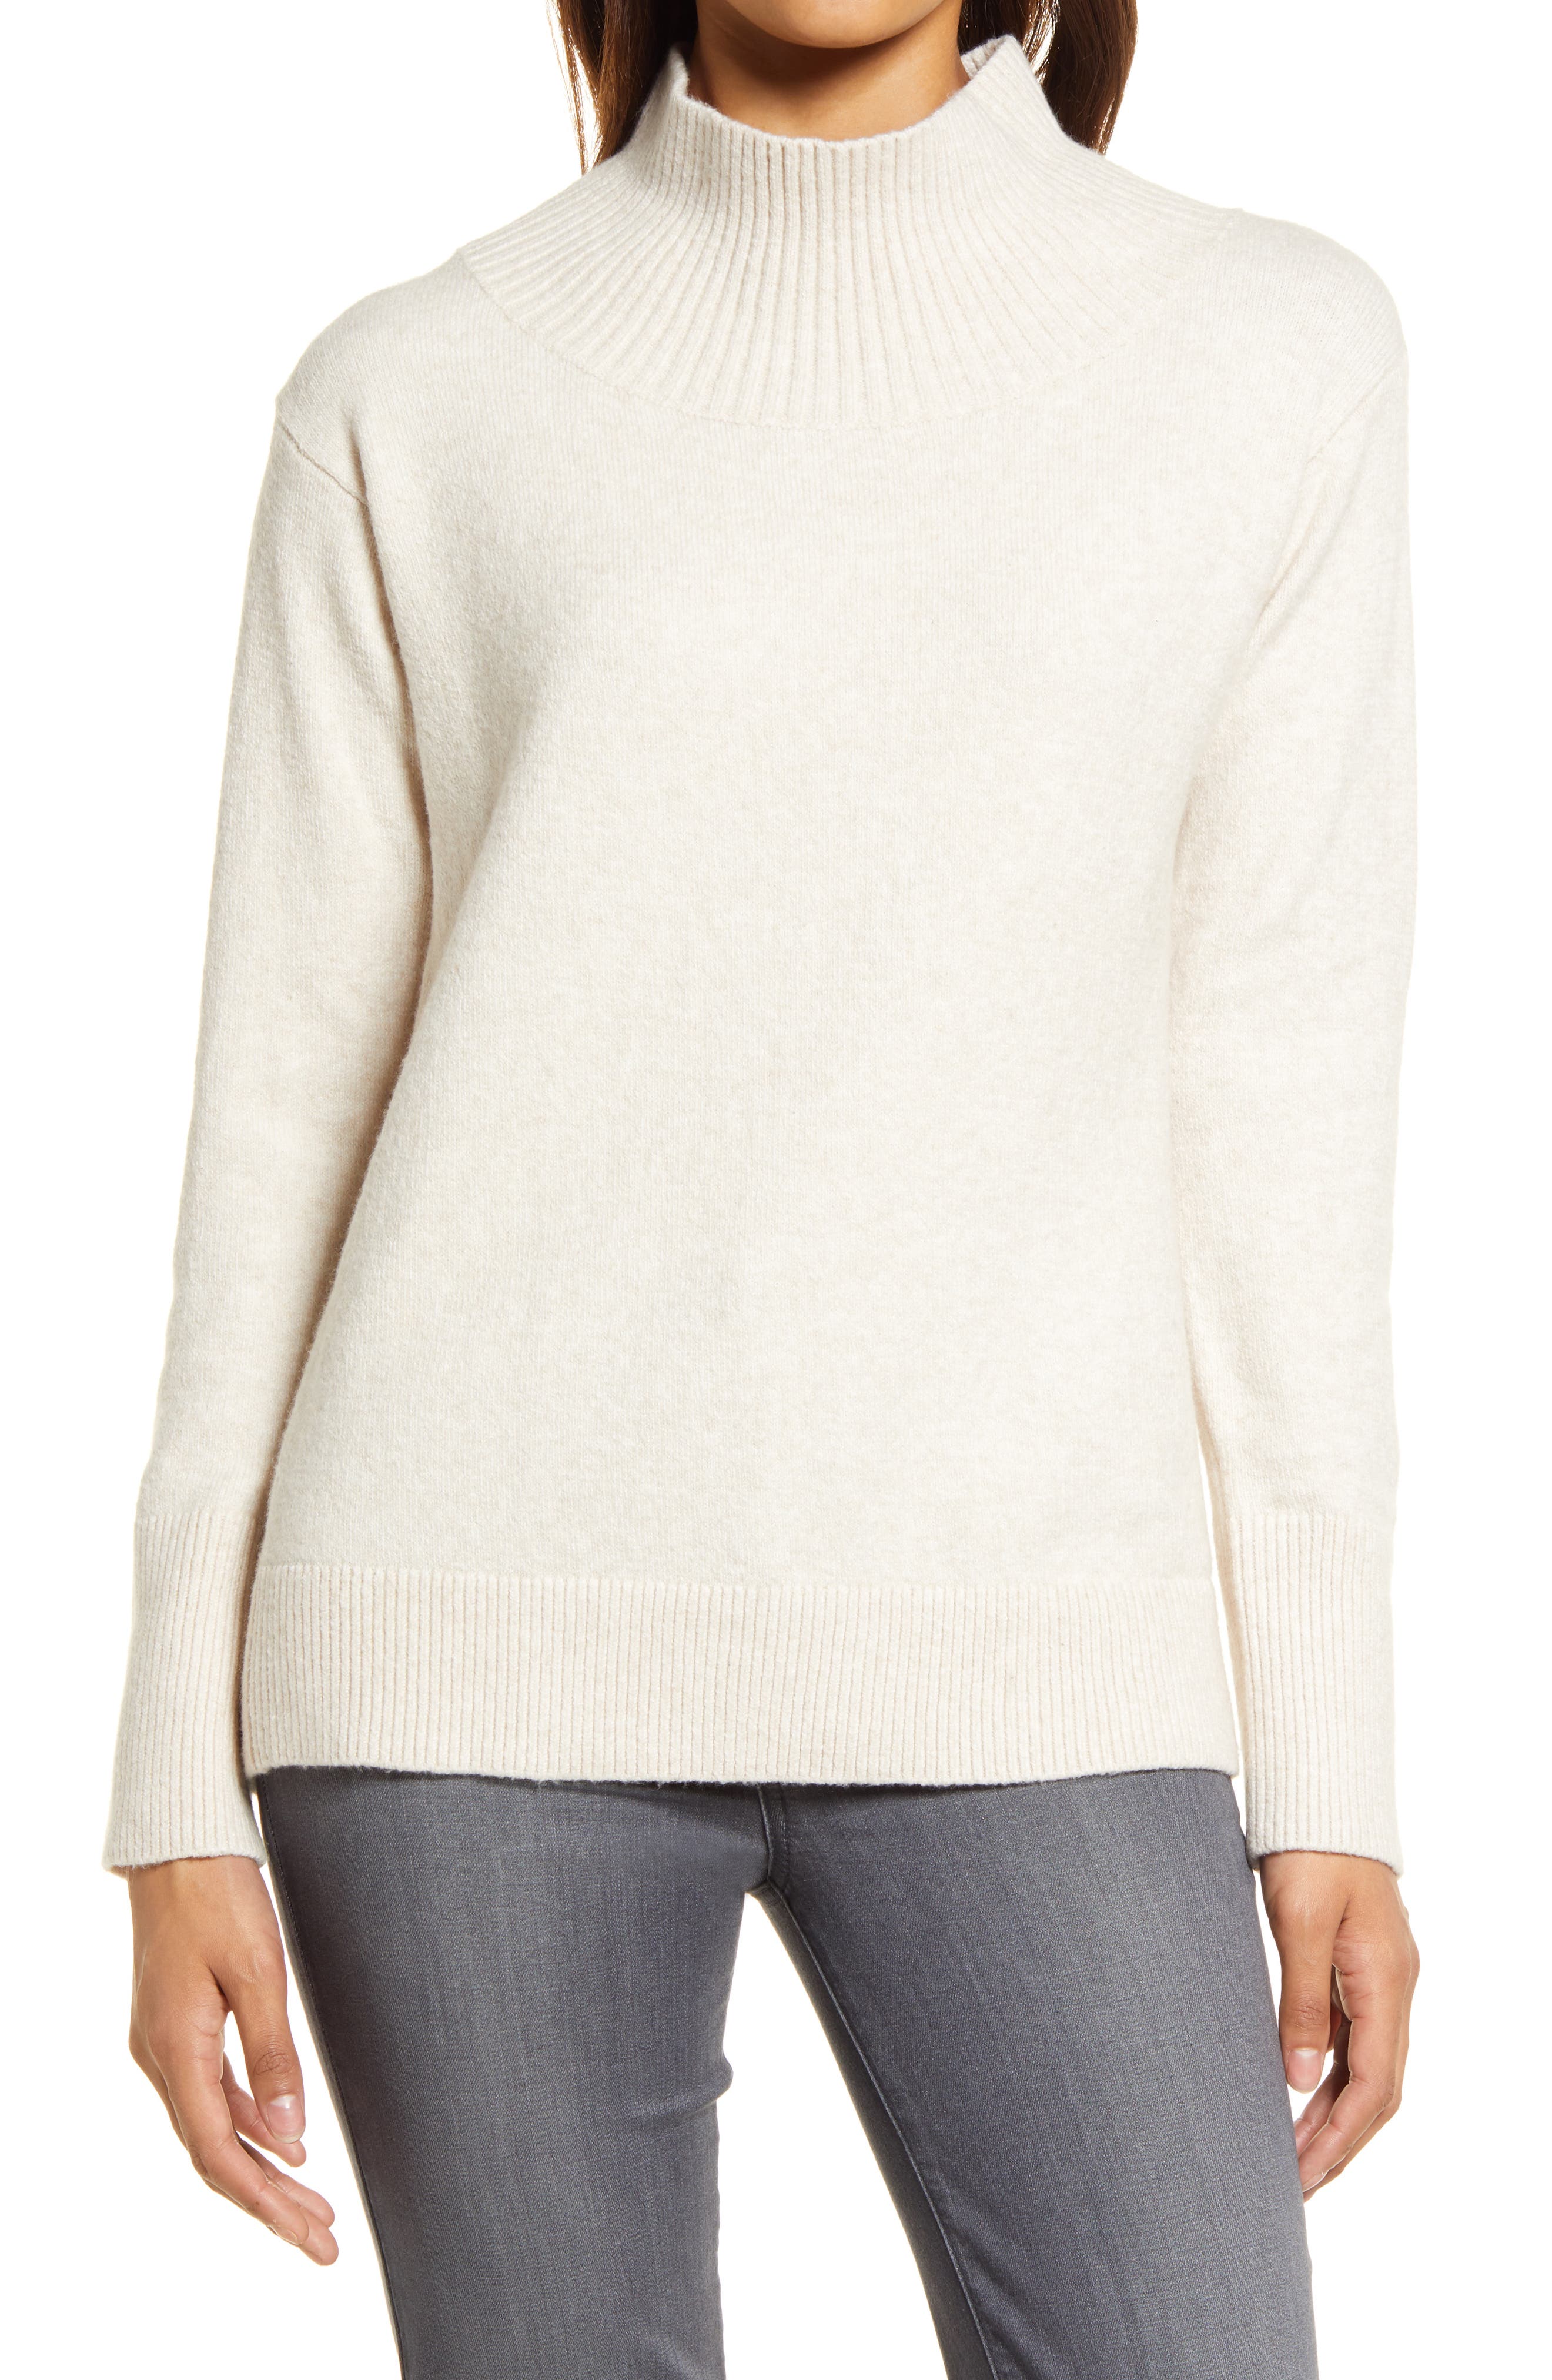 Juun.J Synthetic Basic Turtleneck in Ivory White Womens Clothing Jumpers and knitwear Turtlenecks 